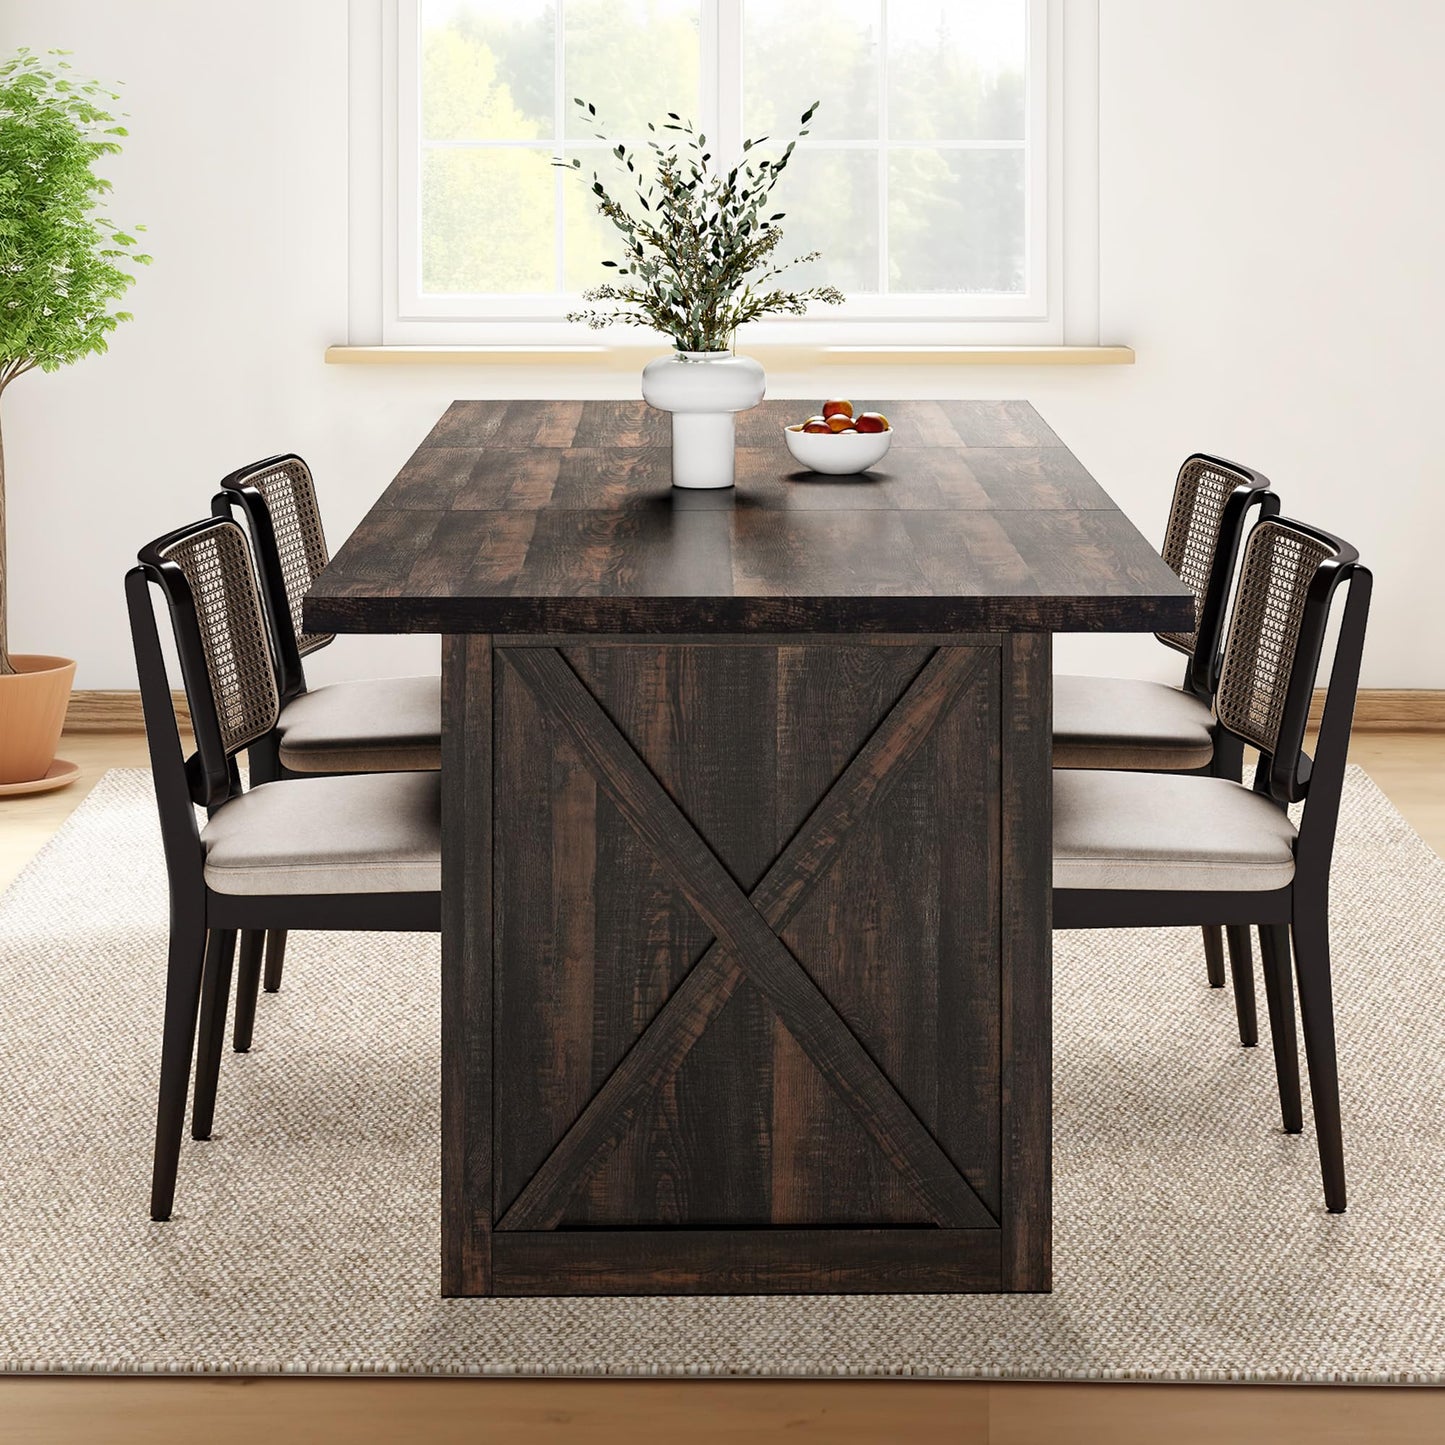 DWVO 70.8" Large Farmhouse Kitchen Dining Room Table for 6 to 8 People, Rustic Oak Industrial Wood Style Rectangle Apartment Dinning Room Dinette